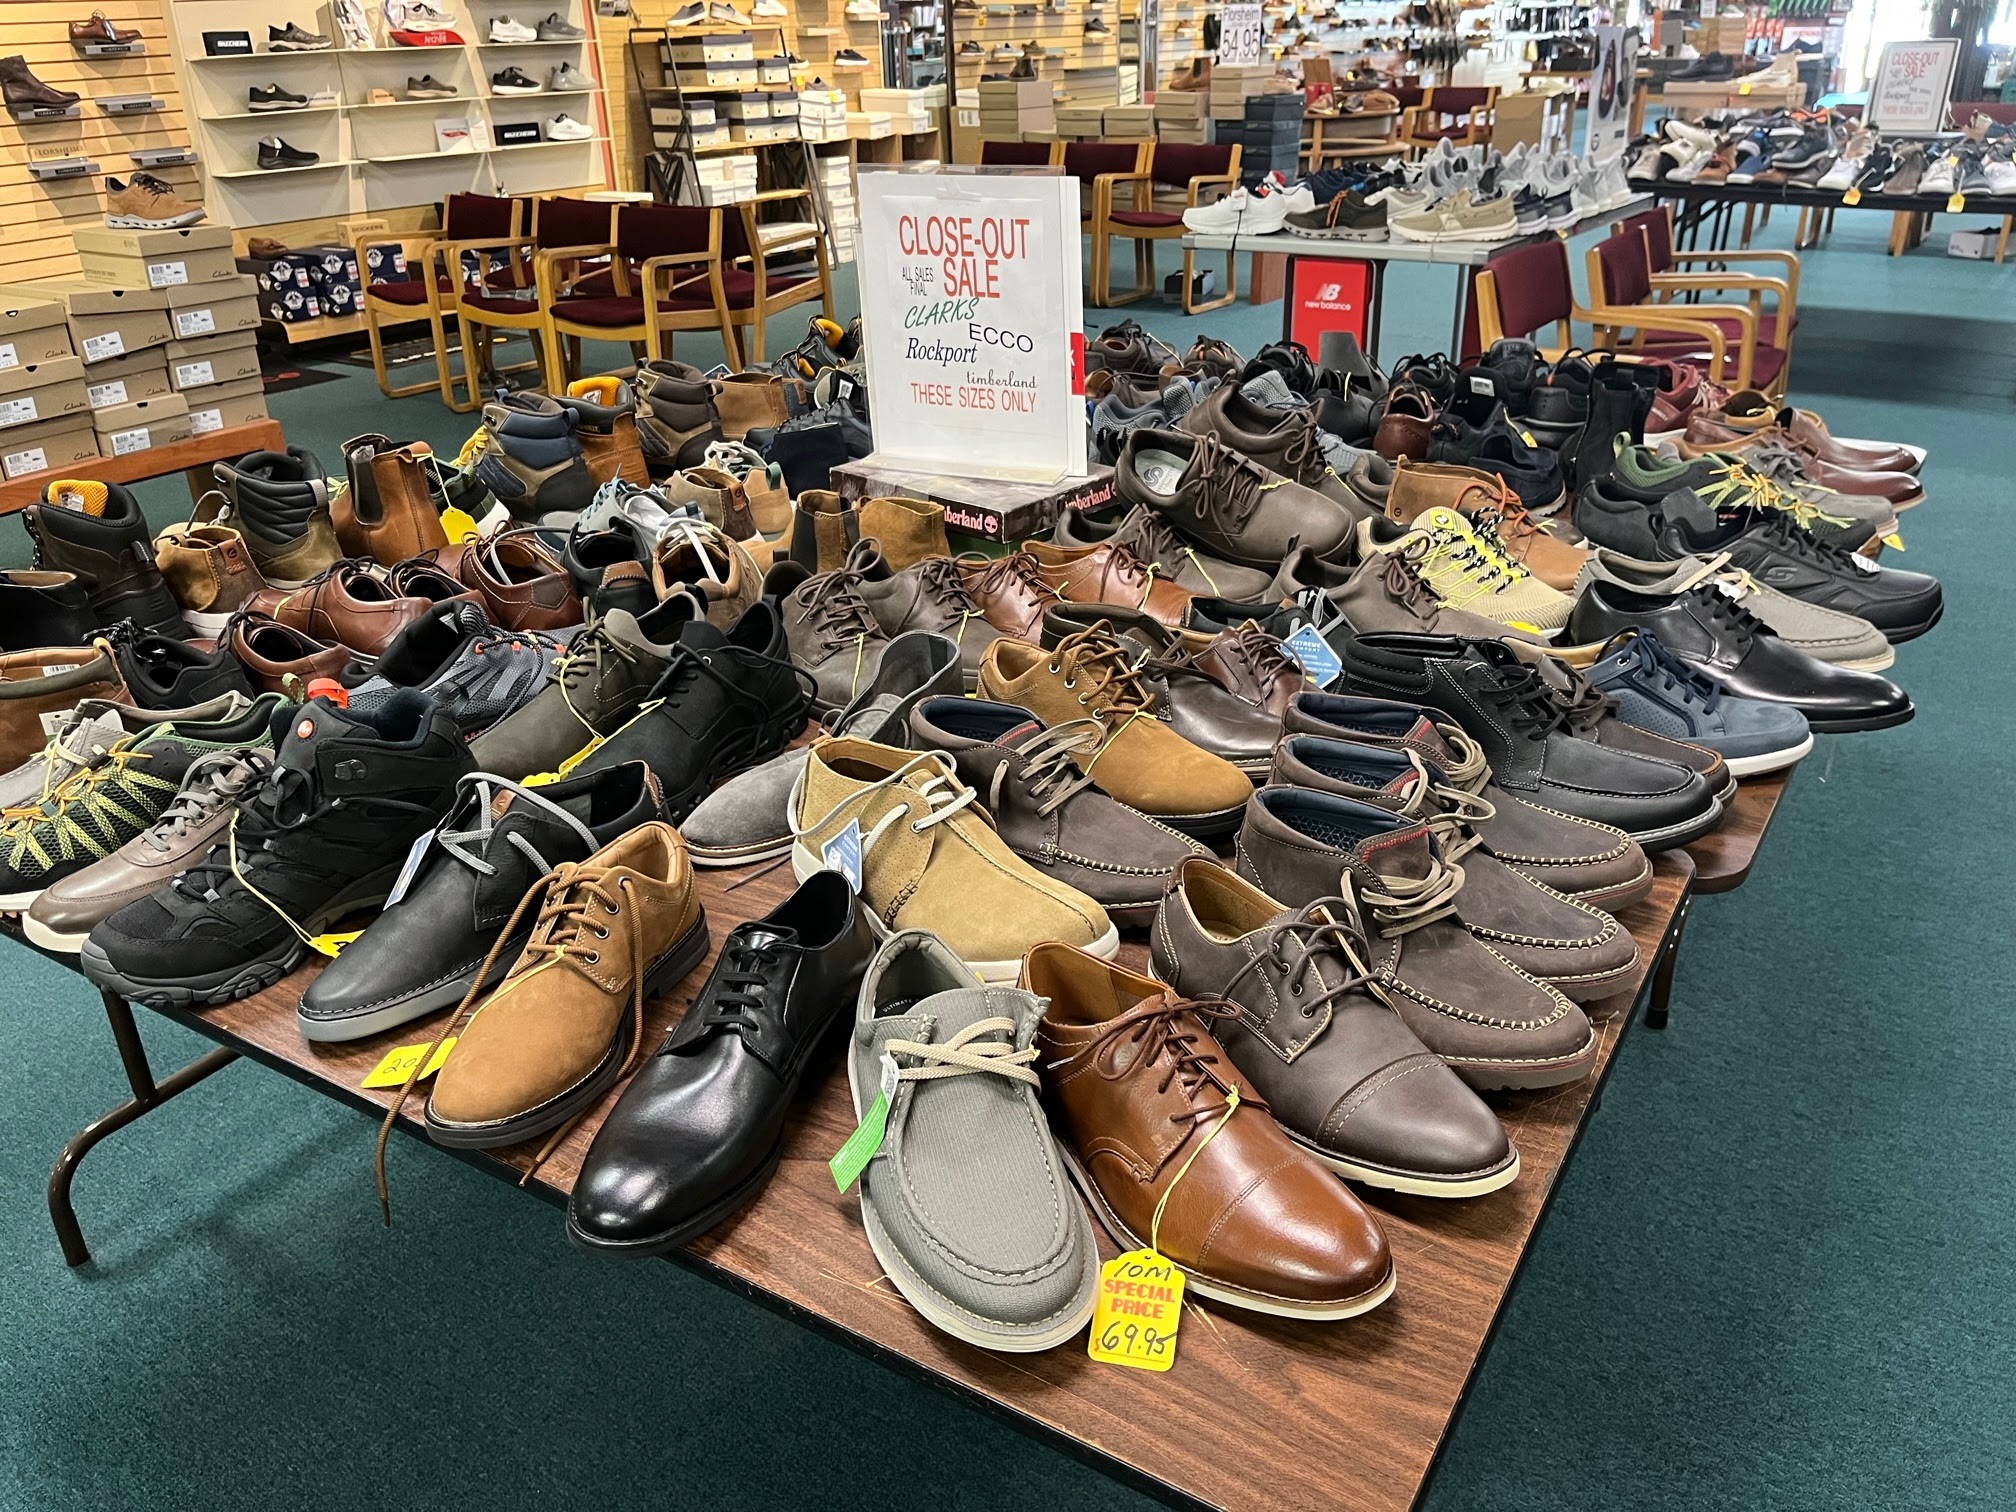 Atlanta Retailer Bennie's Shoes to Close After 114 Years – Footwear News